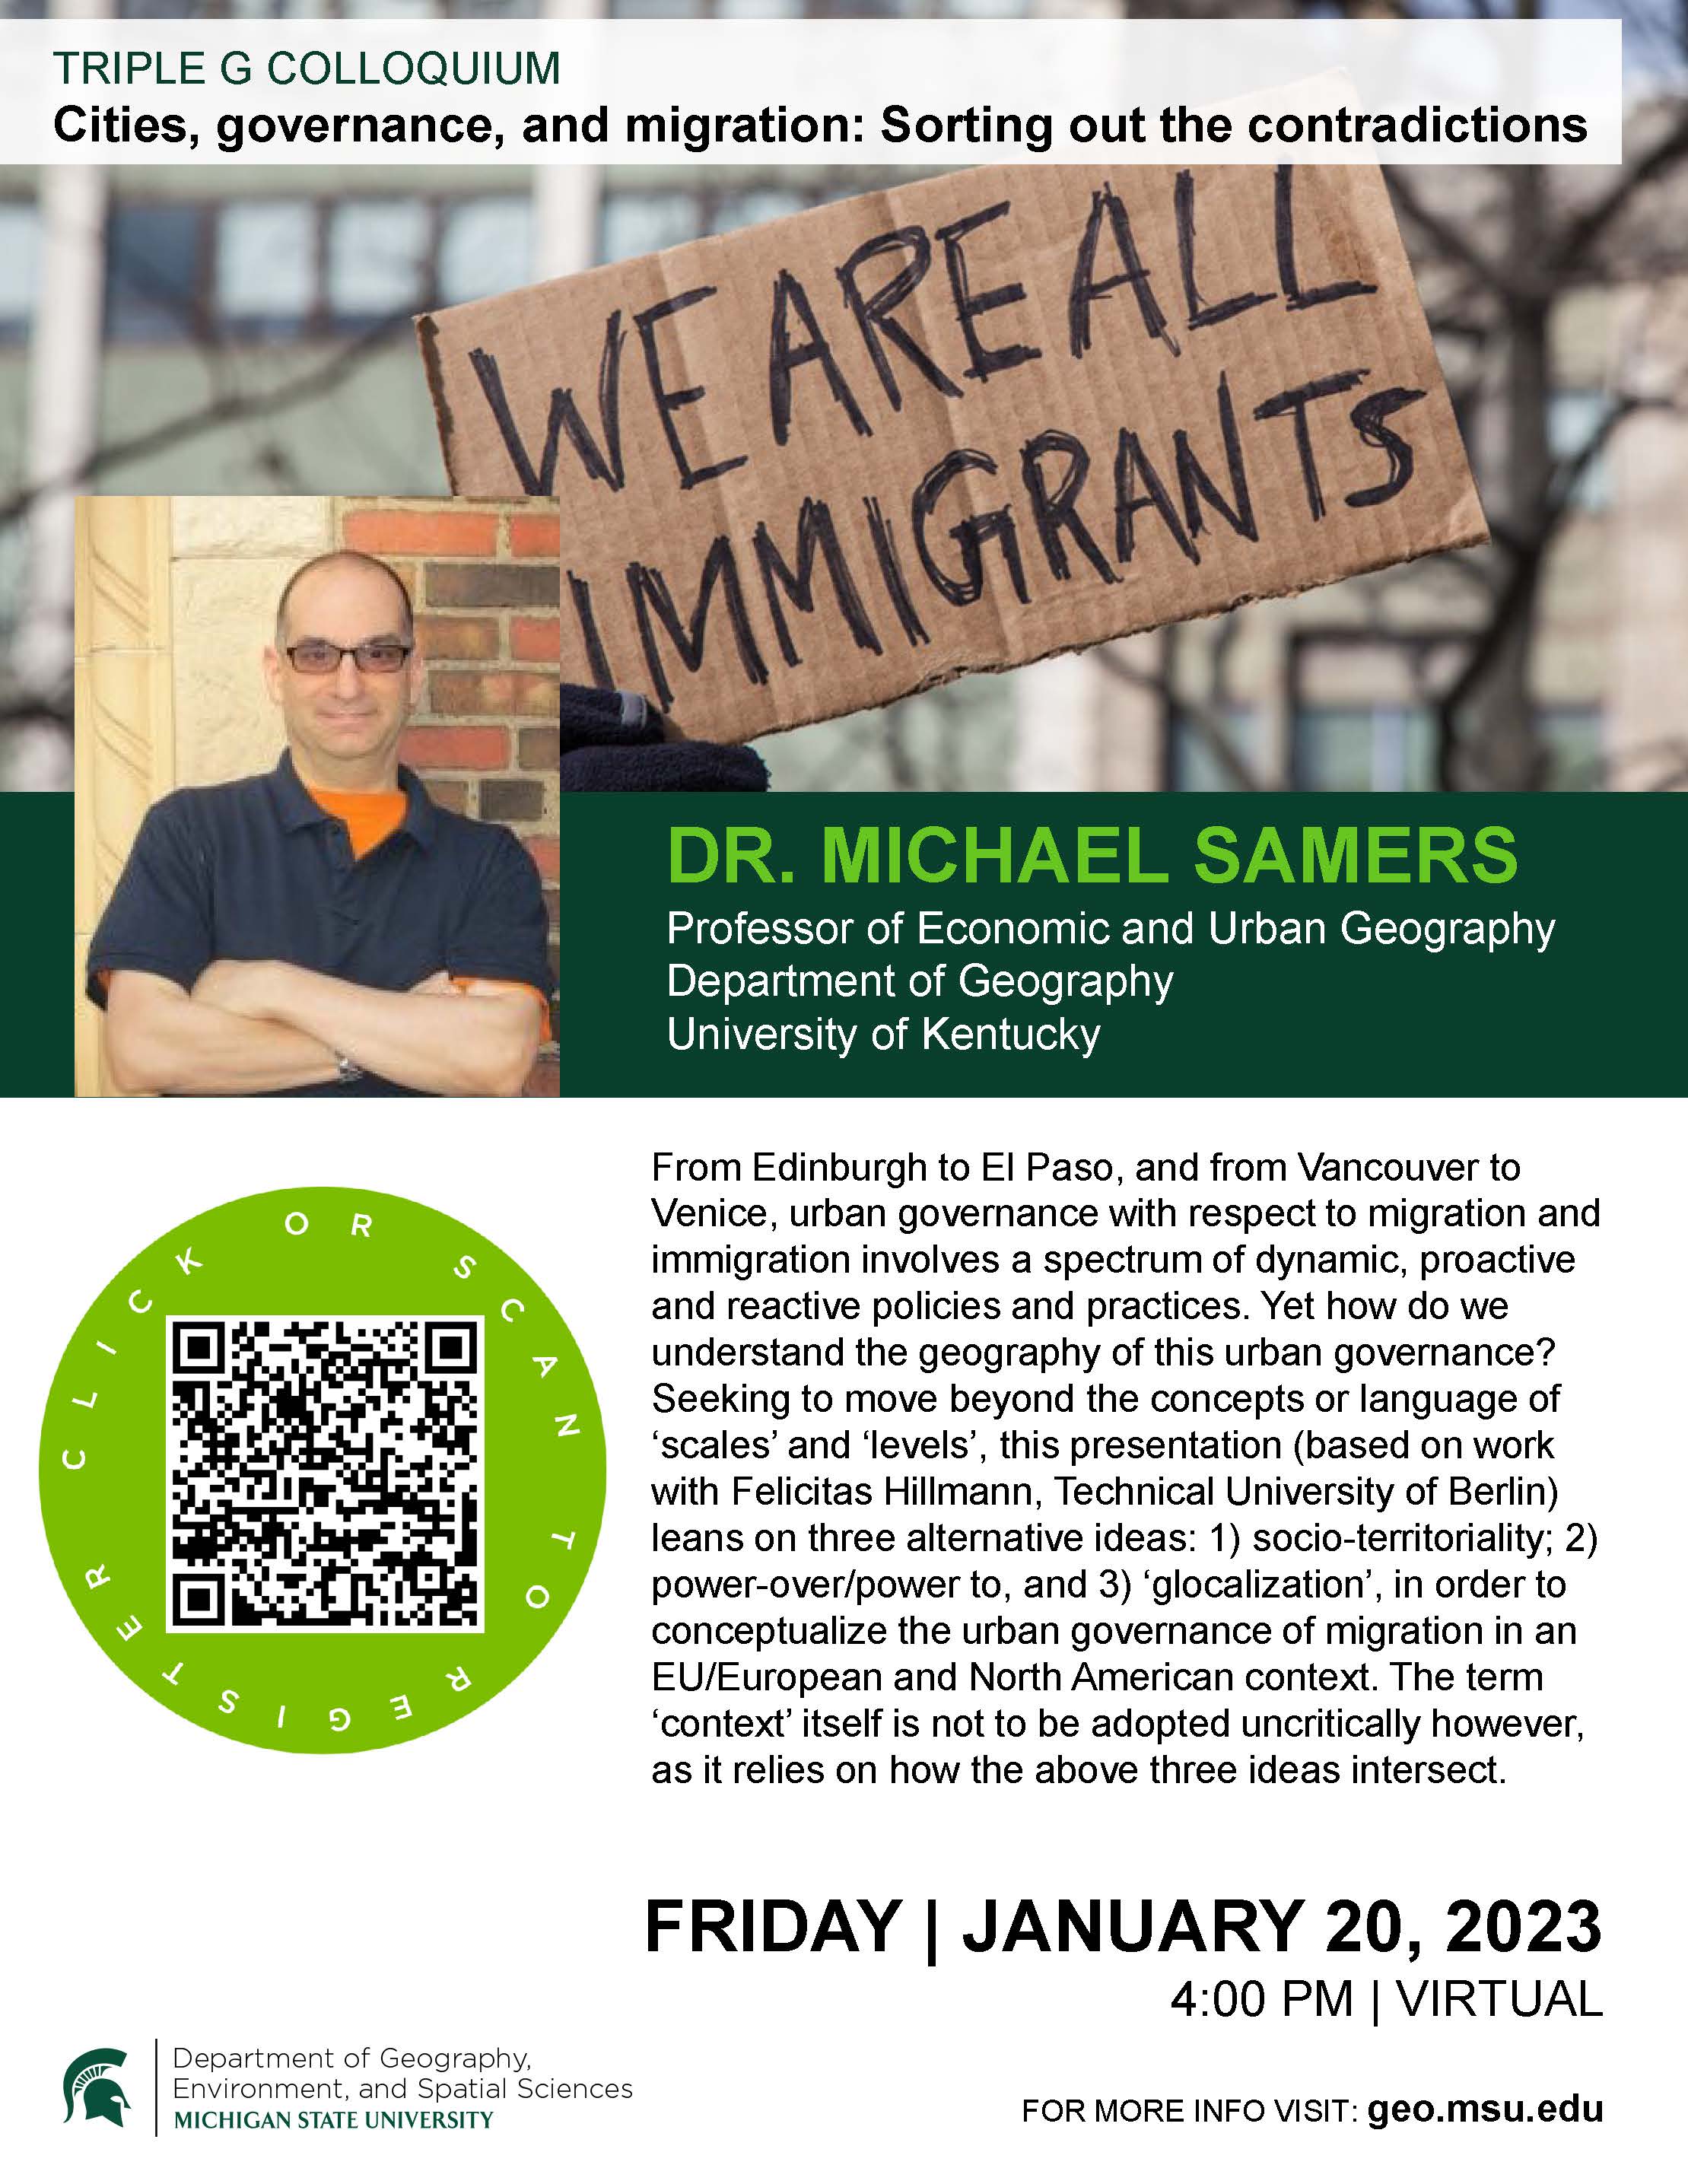 Triple G Colloquium with Dr. Michael Samers